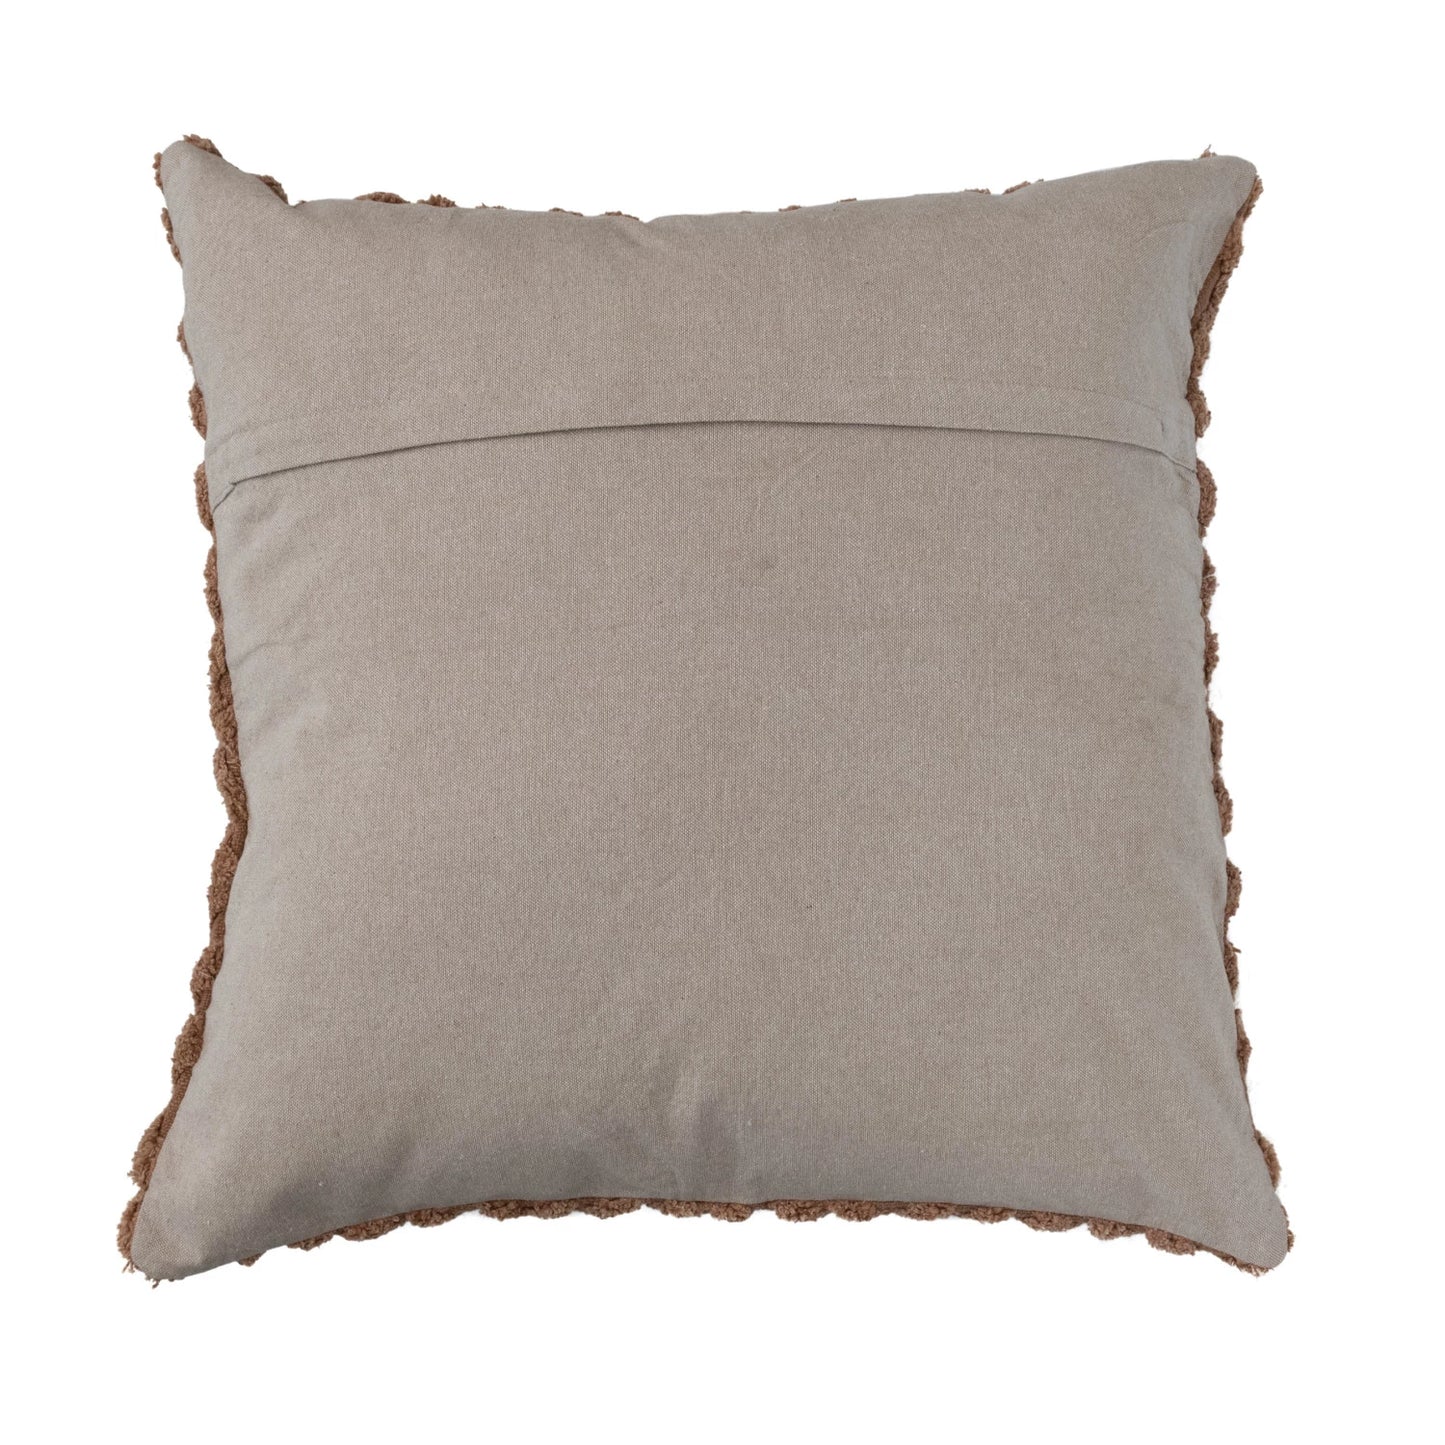 Cotton & Chambray Tufted Pillow